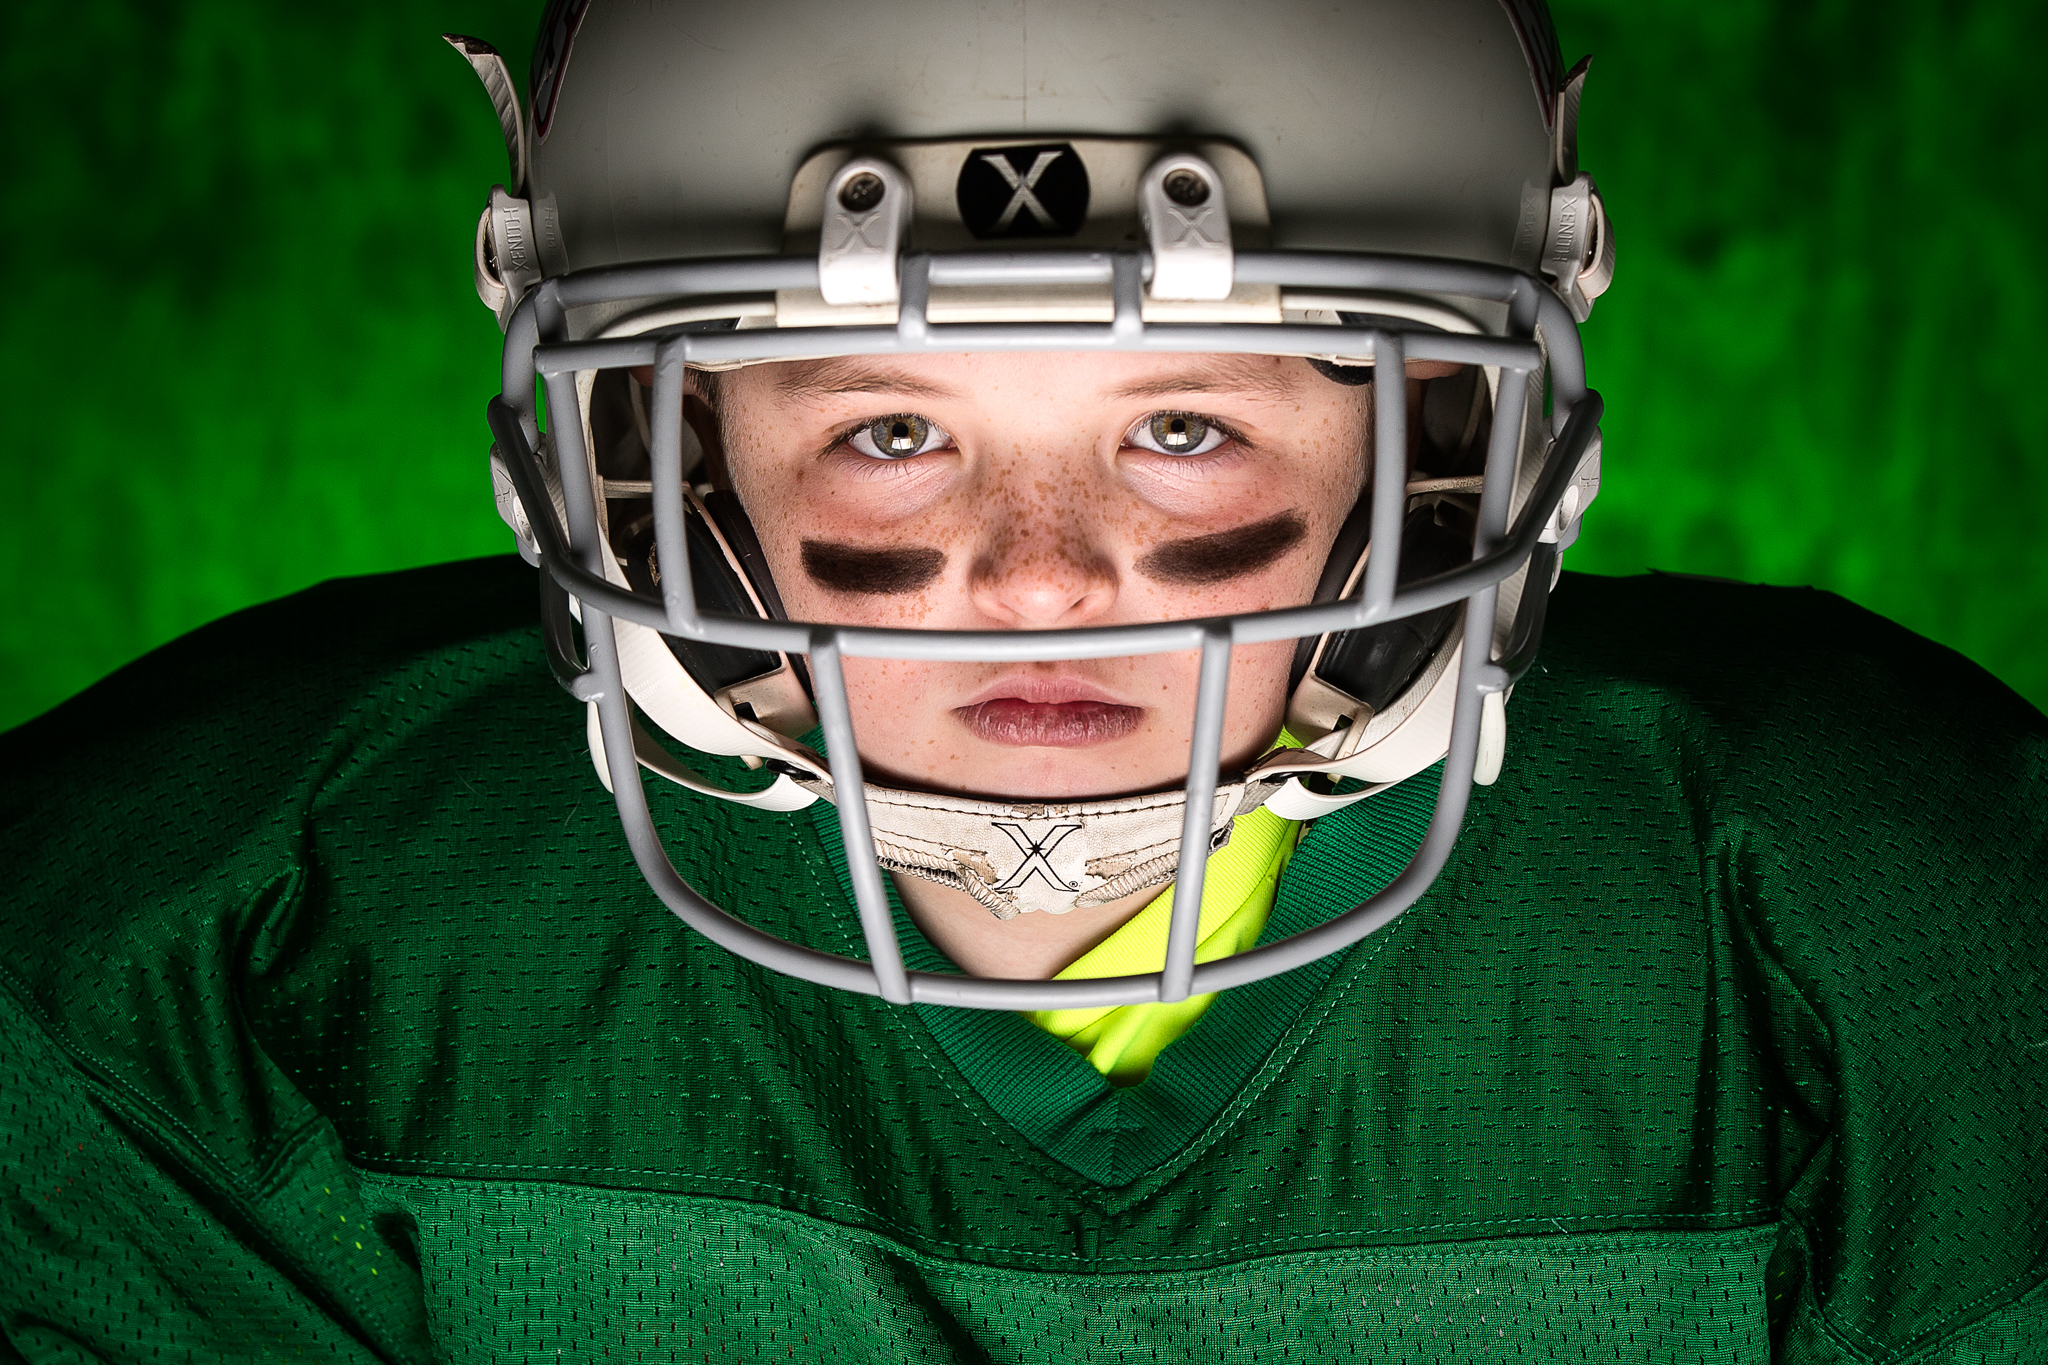 youth-football-rochester-portrait-photo-photography-photographer-dover-new-hampshire-boston.jpg